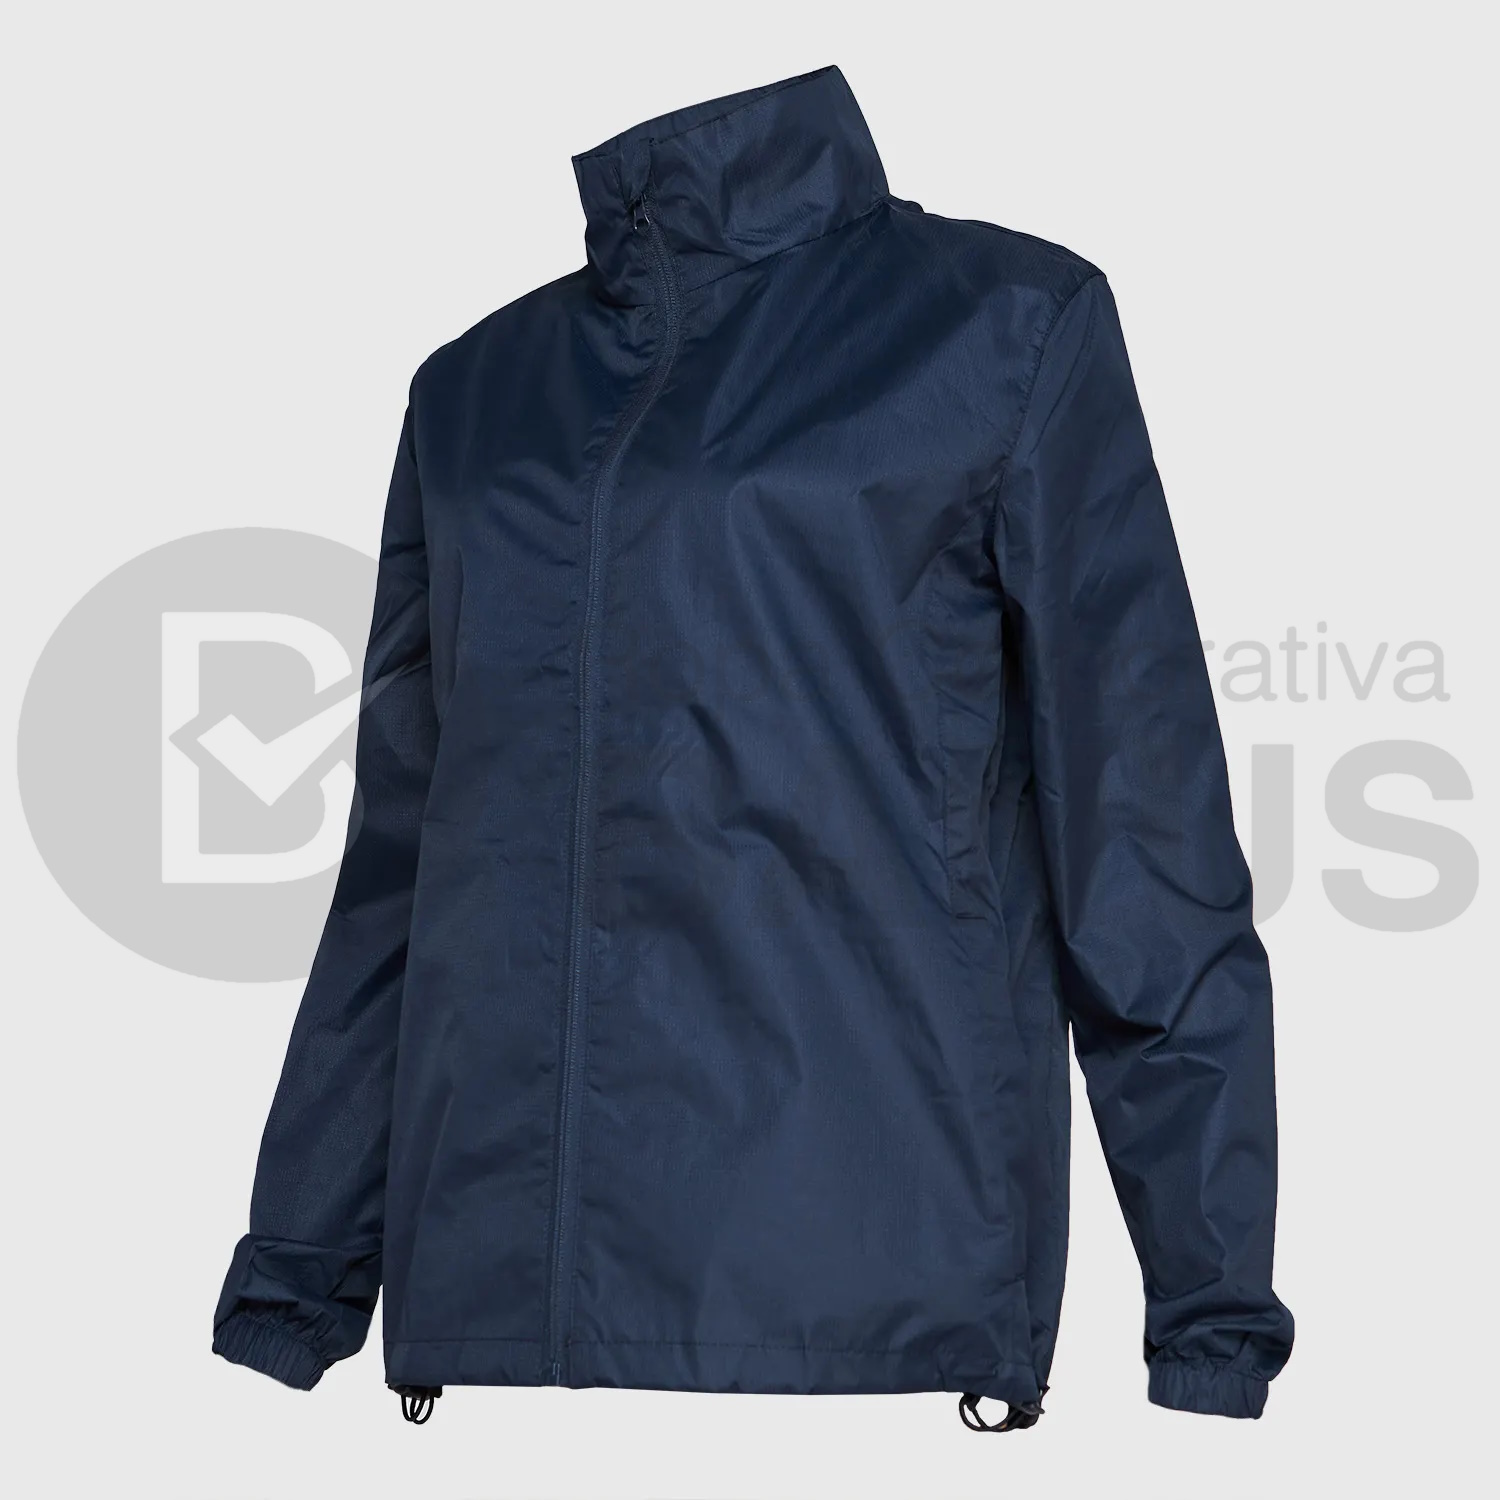 CORTAVIENTO IMPERMEABLE MUJER